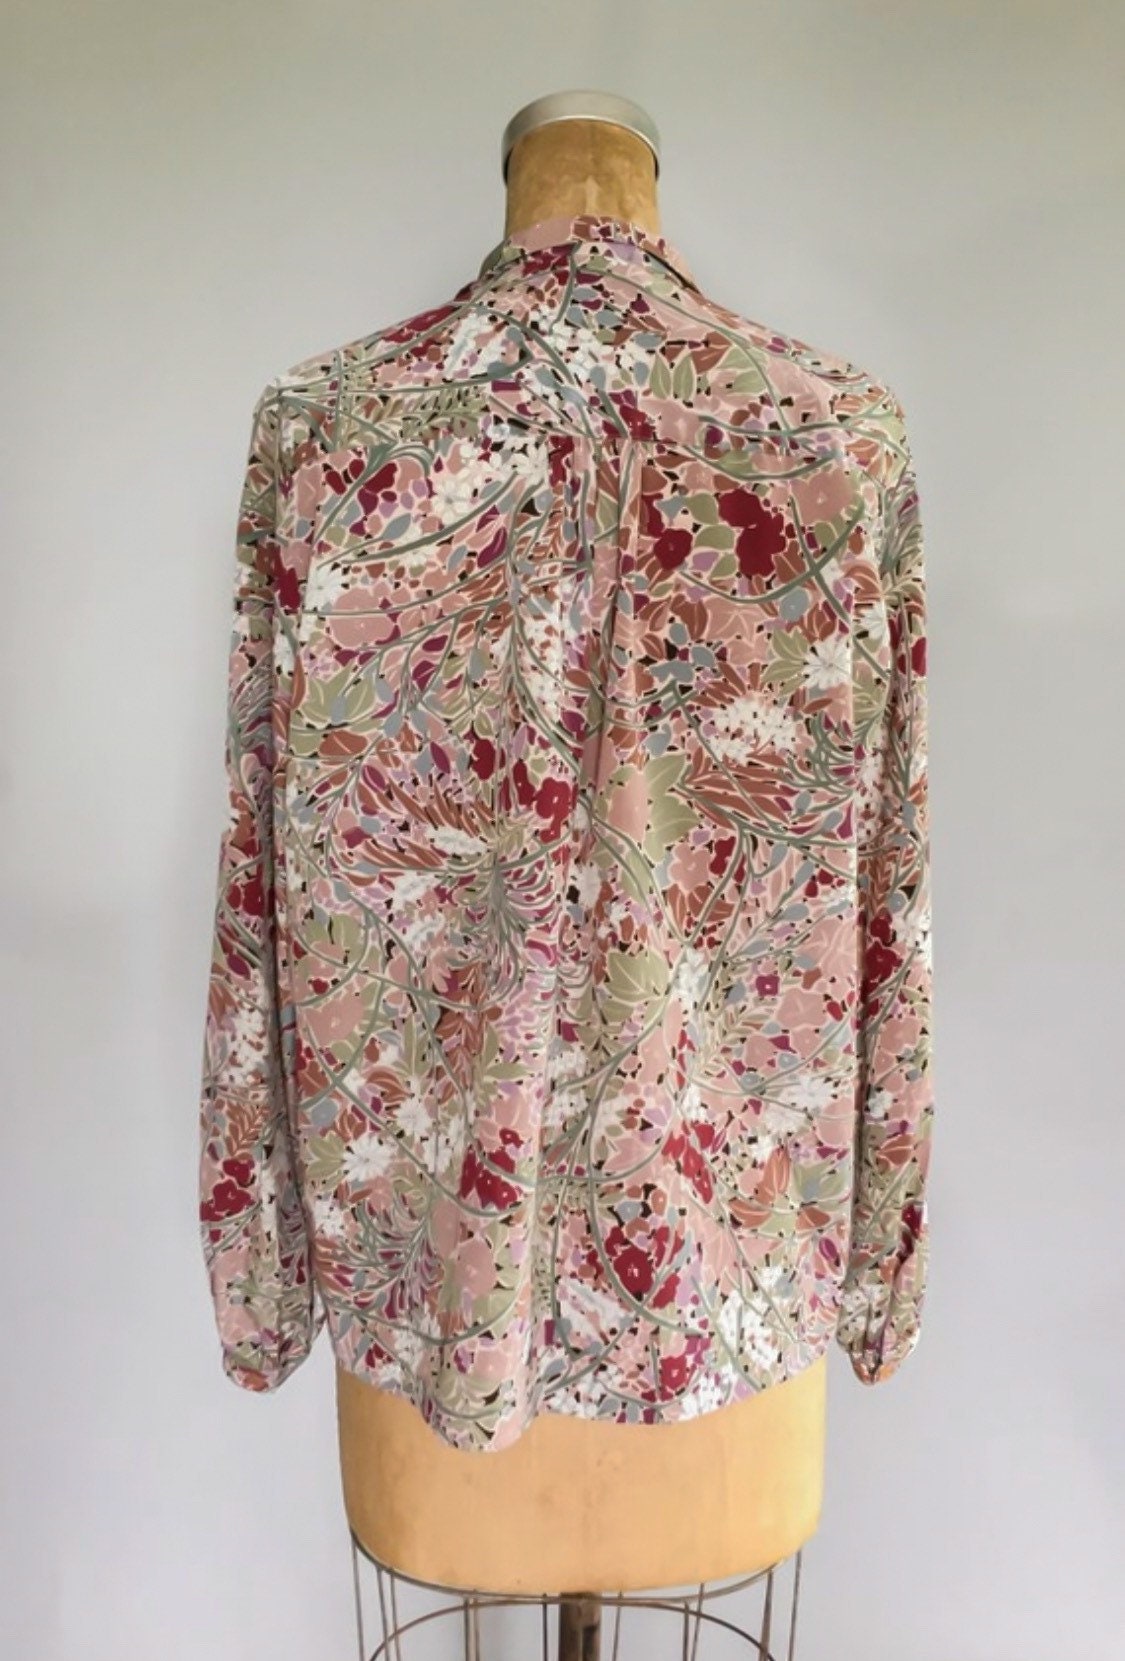 Vintage 1970s 70s dusty rose floral silky blouse small S medium m